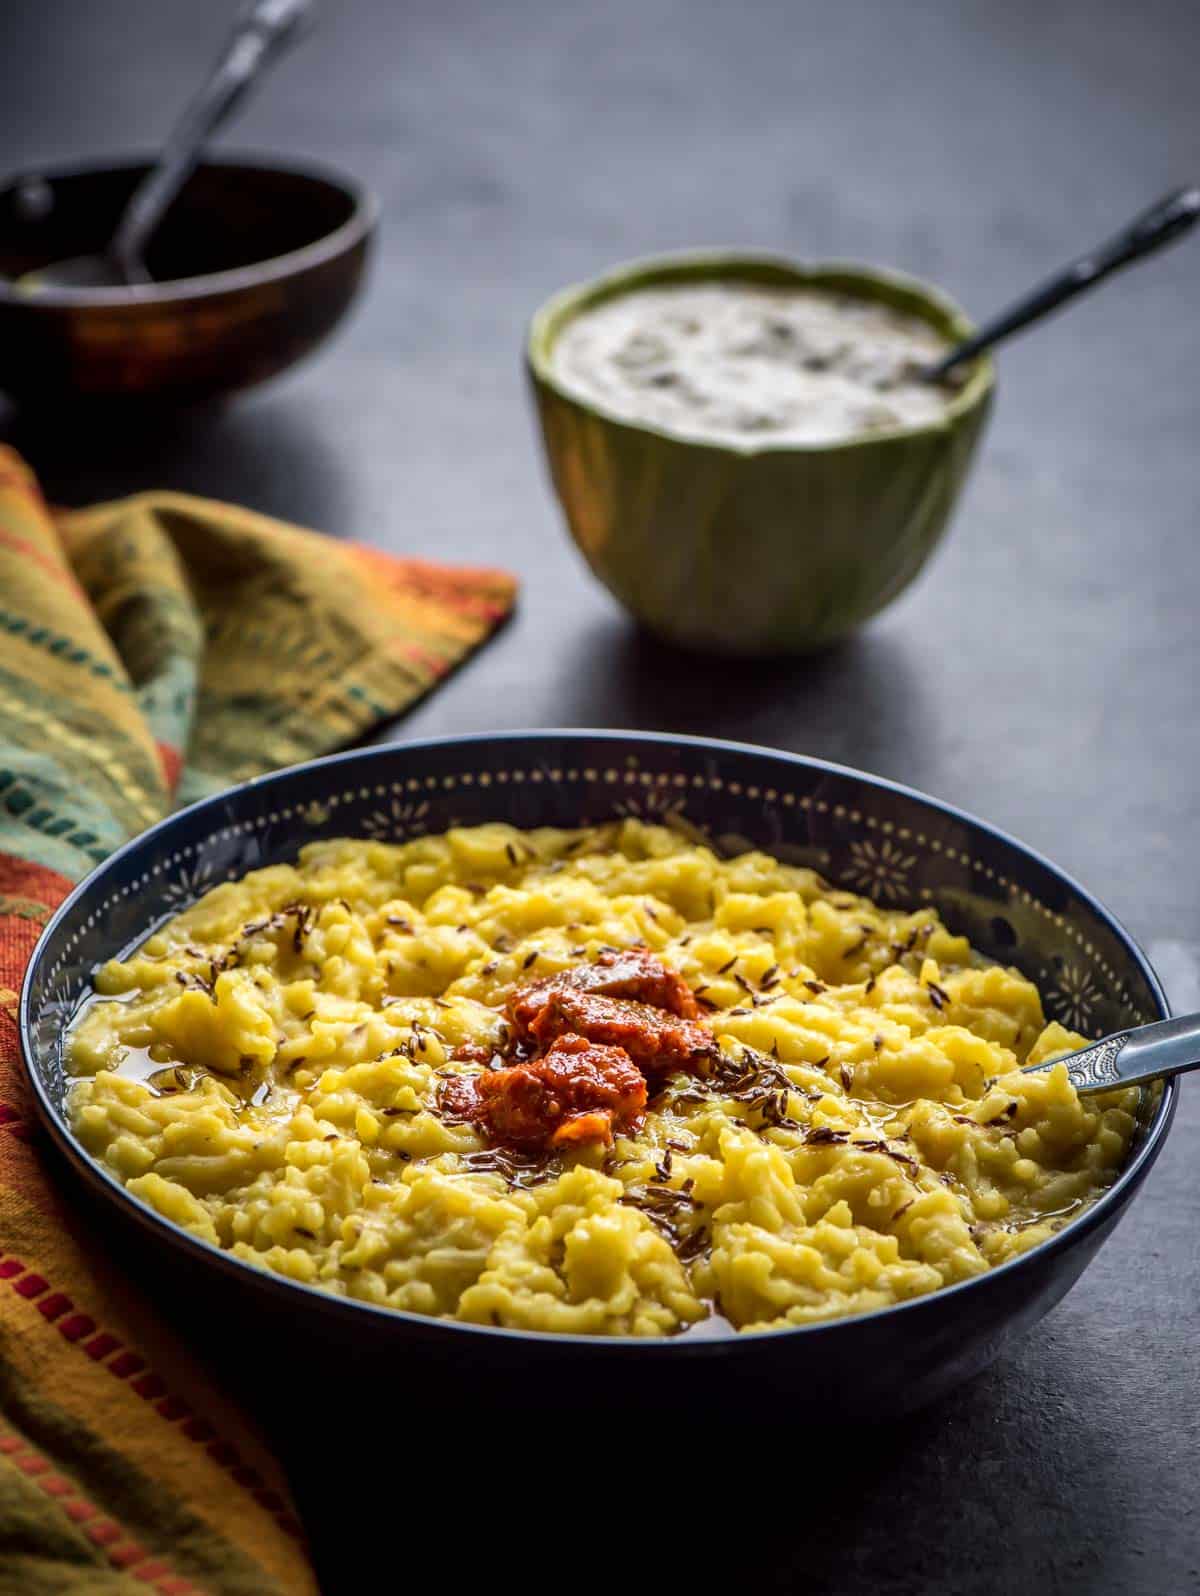 Moong dal khichdi served with raita and tempering in a blue bowl